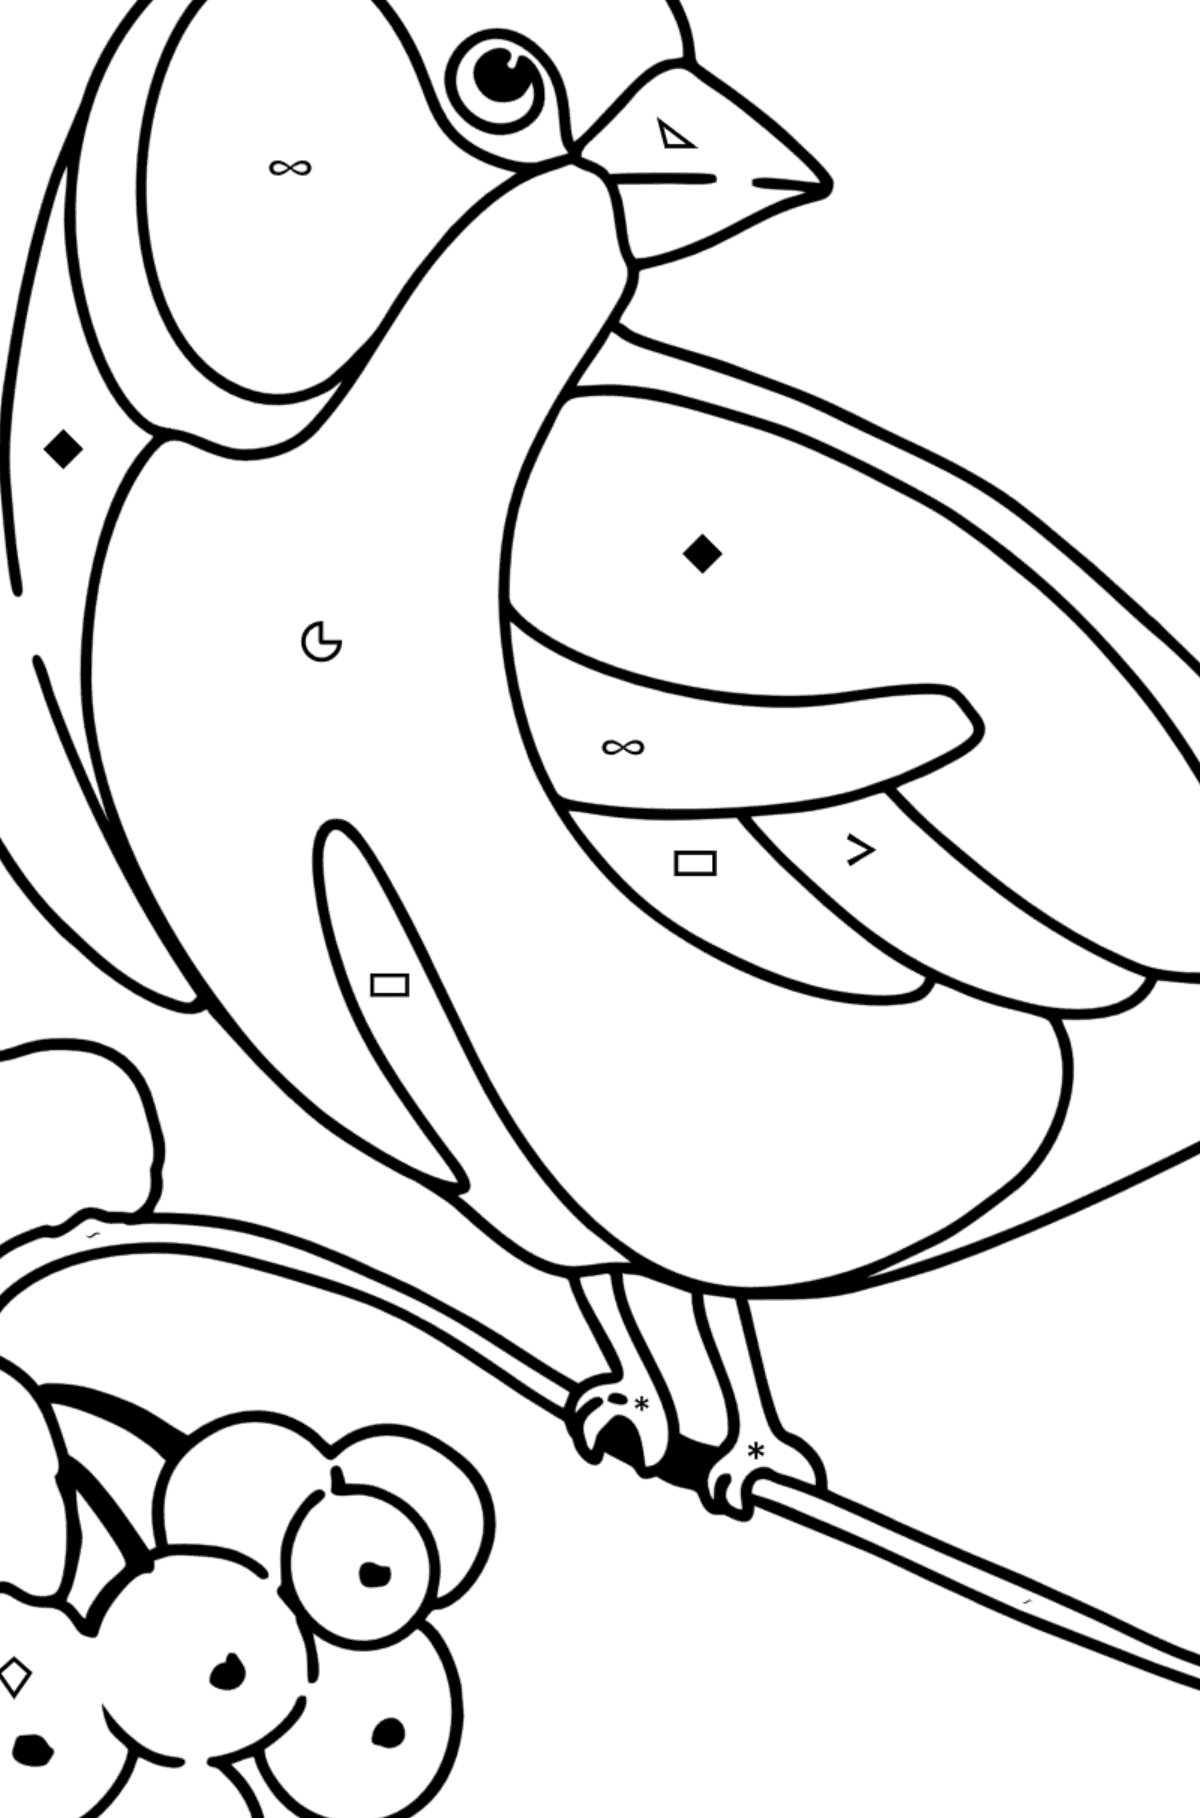 Coloring page - Titmouse on Mountain Ash - Coloring by Symbols and Geometric Shapes for Kids